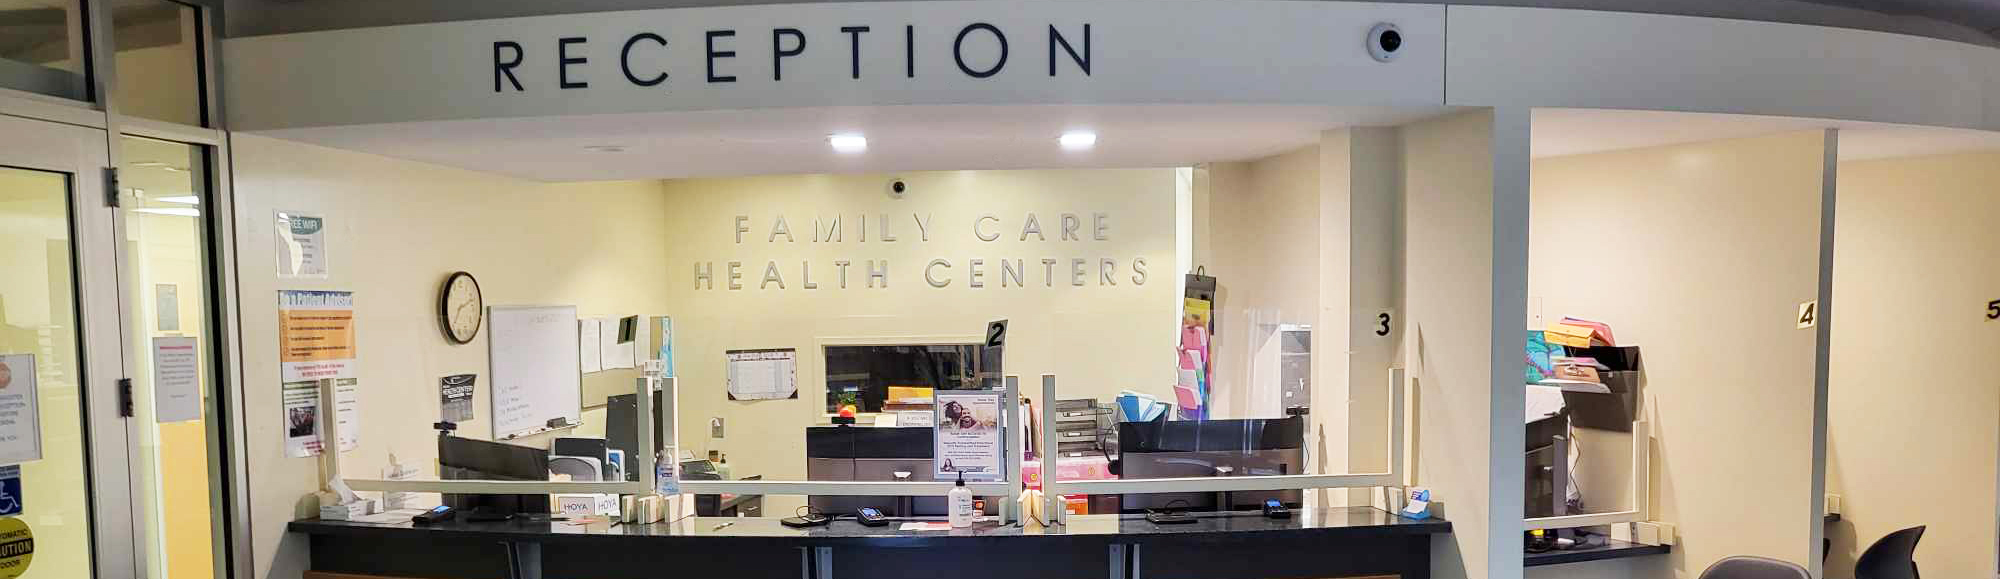 Family Care Health Centers  Sliding Scale